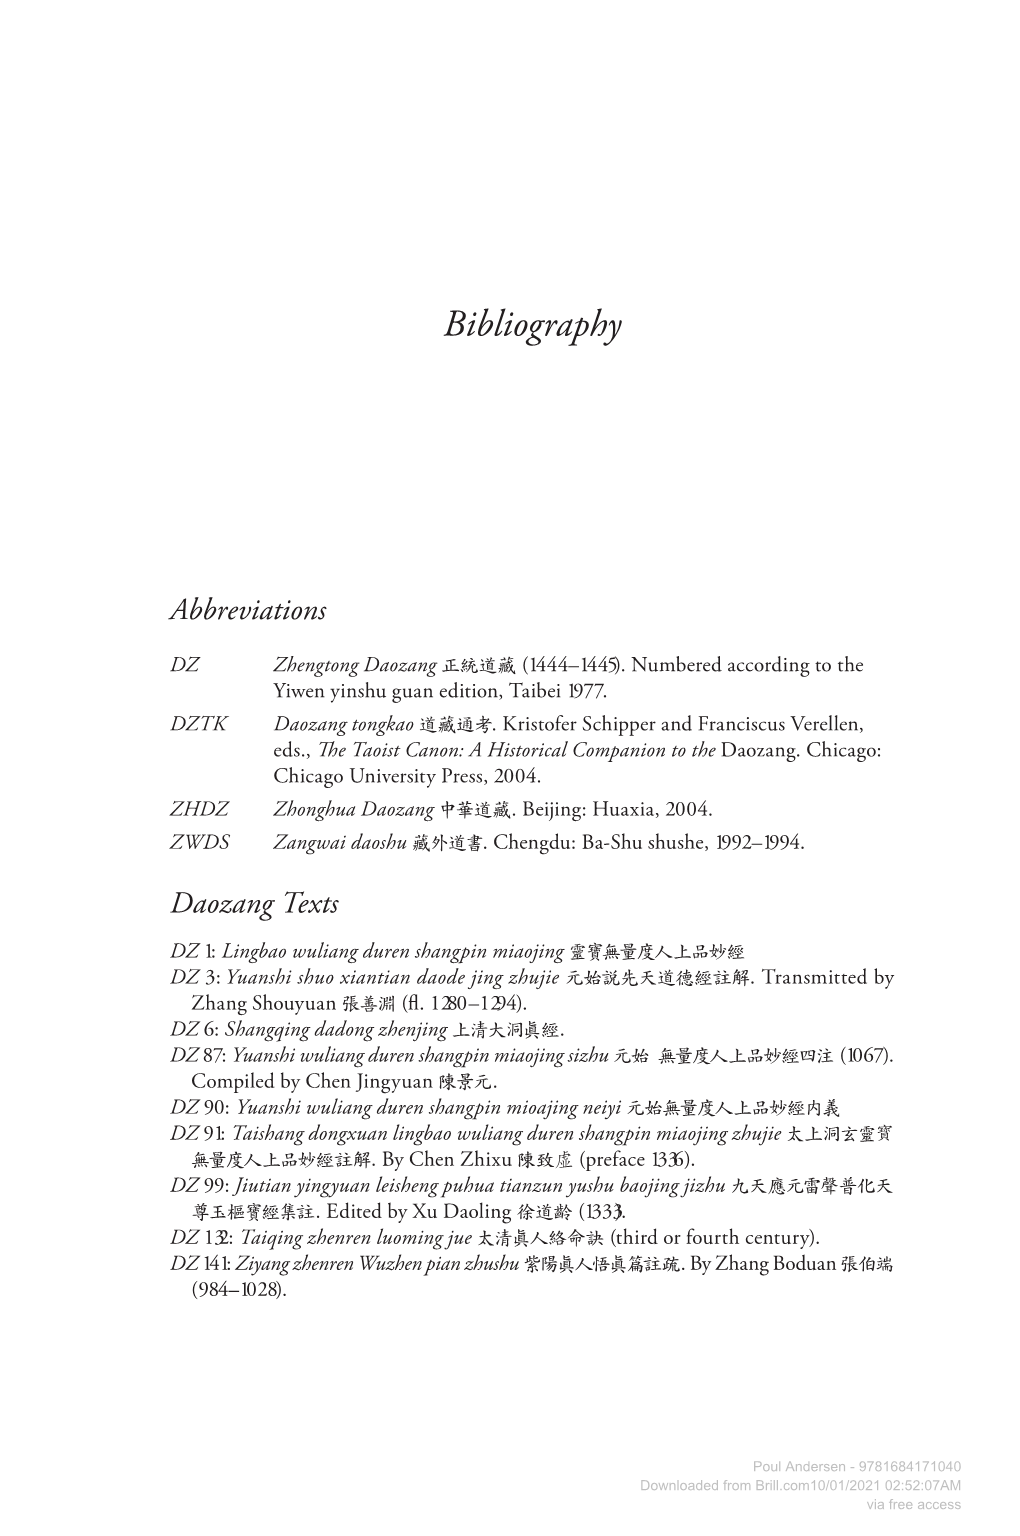 Downloaded from Brill.Com10/01/2021 02:52:07AM Via Free Access 316 Bibliography